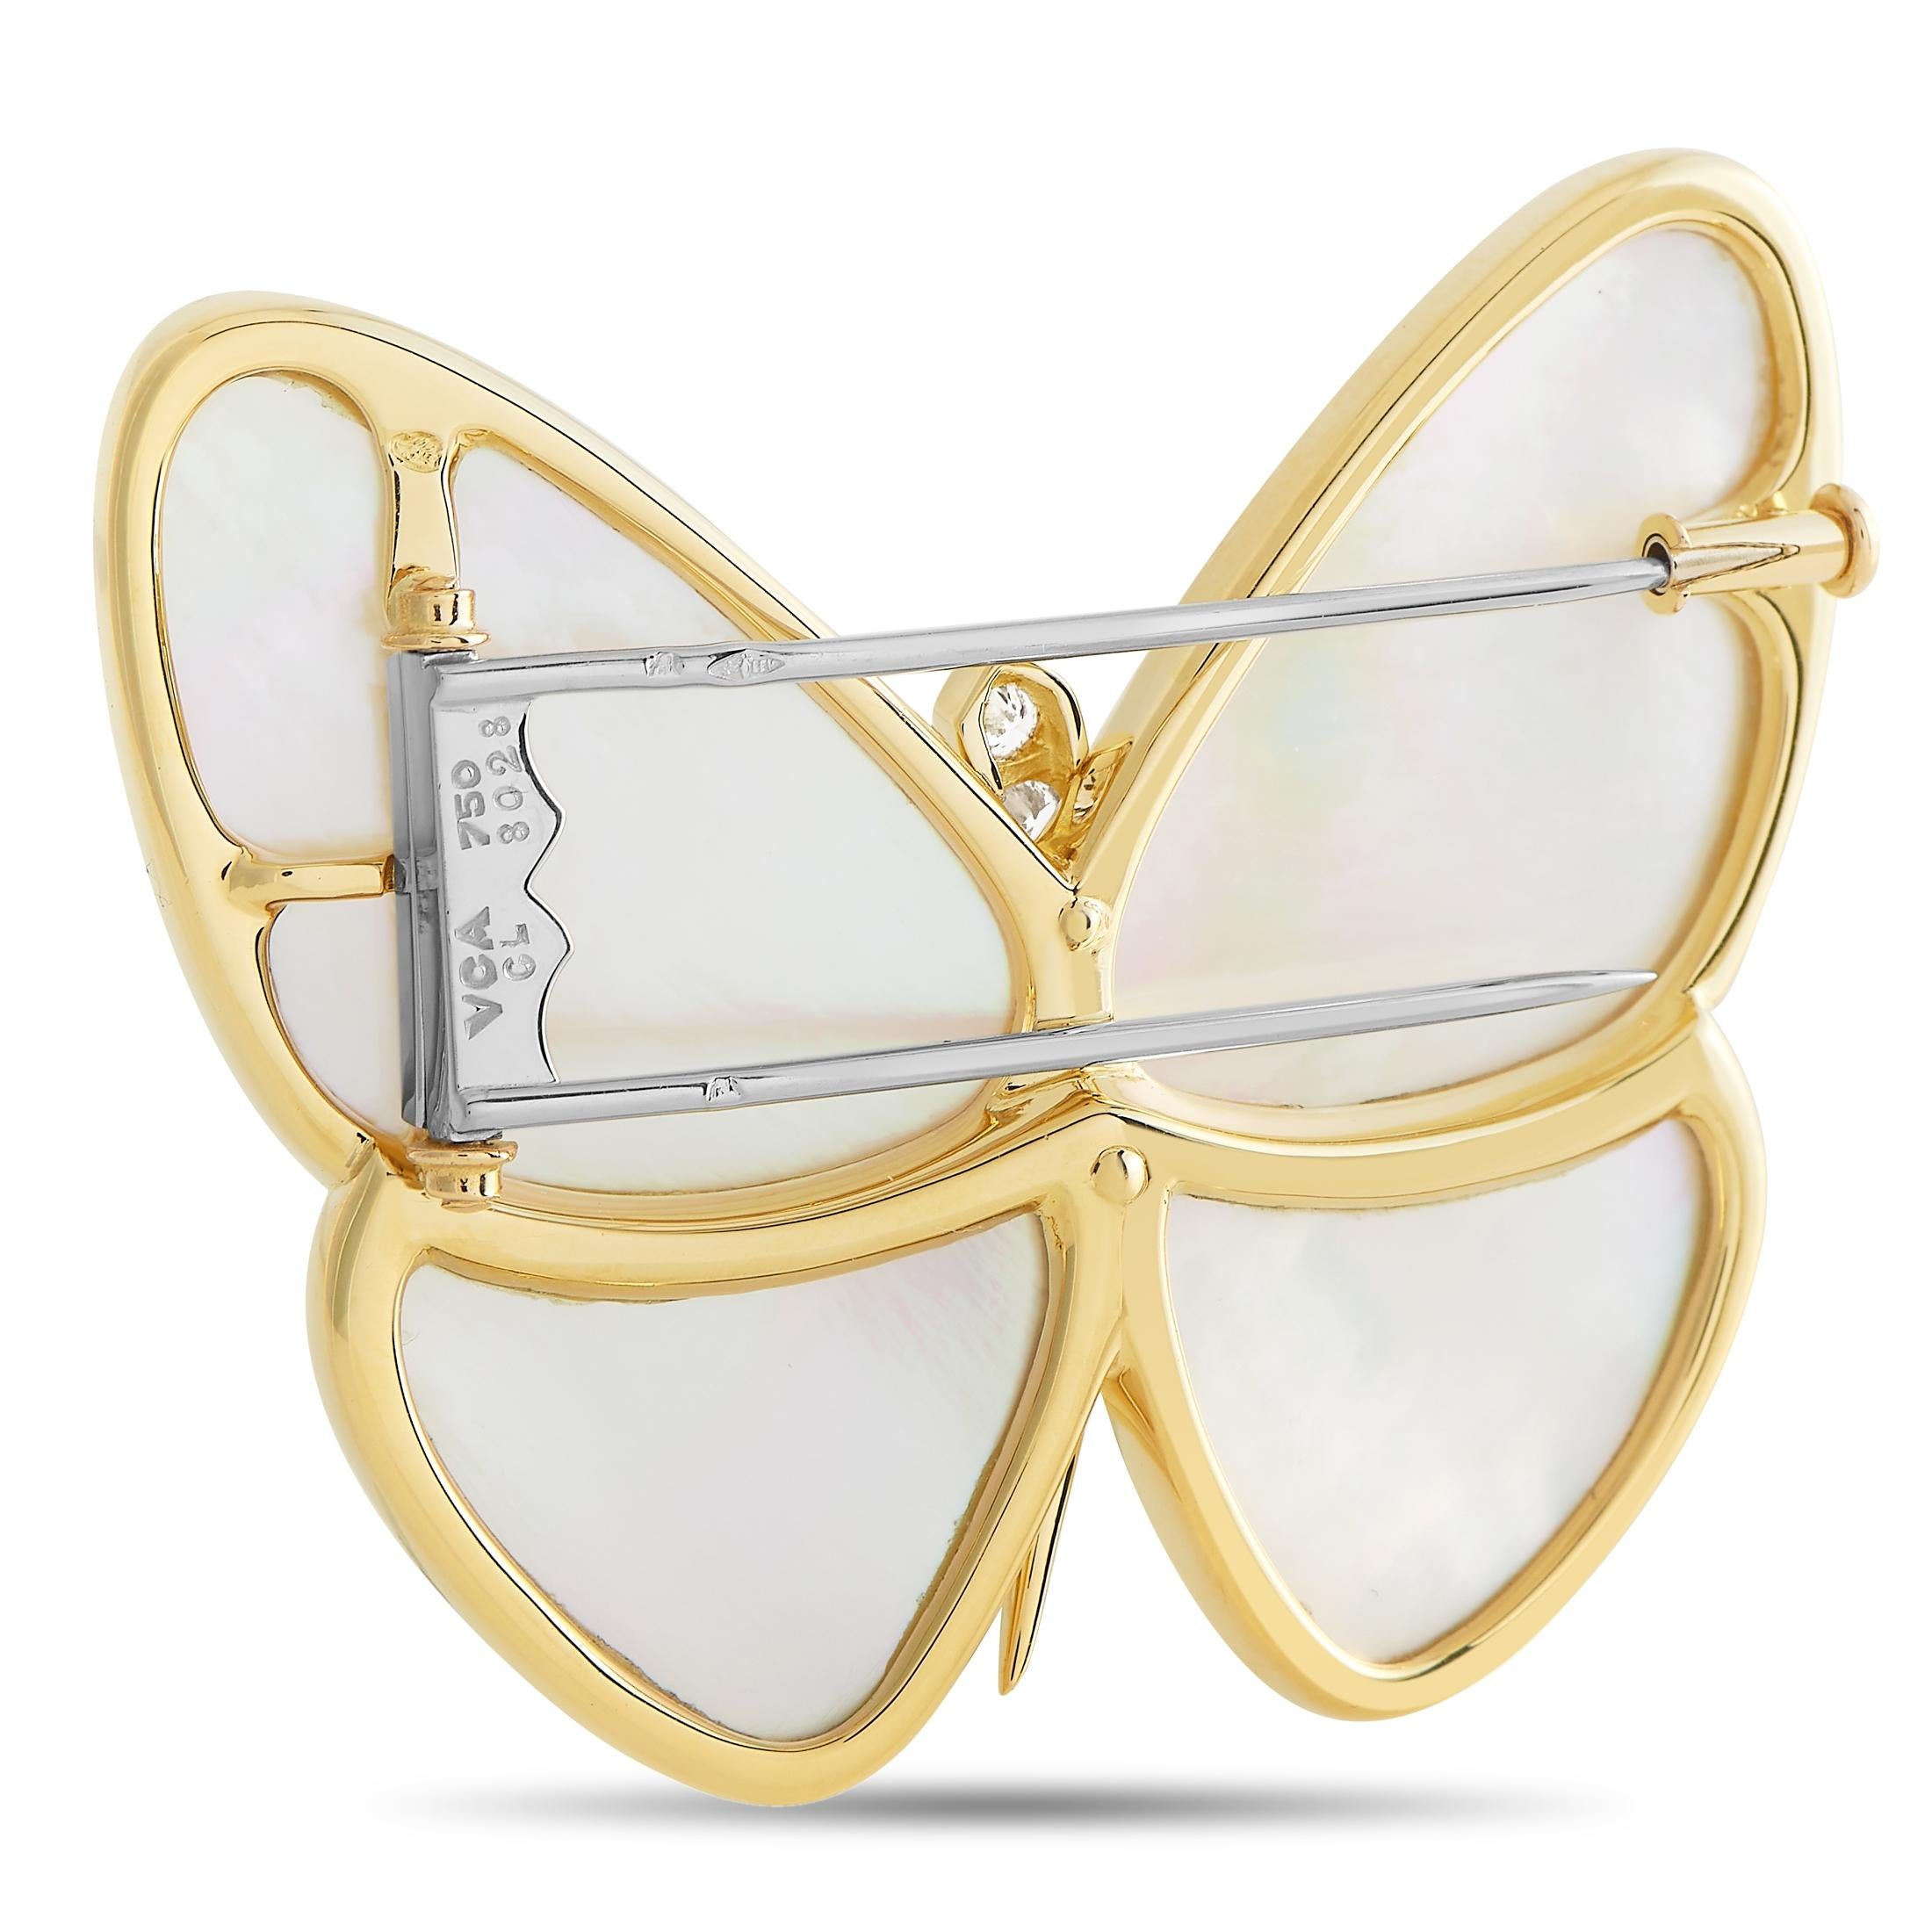 This charming Van Cleef & Arpels brooch is made with 18K yellow gold and forms a beautiful butterfly. The body of the butterfly is set with a 0.23 carat curved row of diamonds, while each segment of its wings is inlaid with a soft white mother of